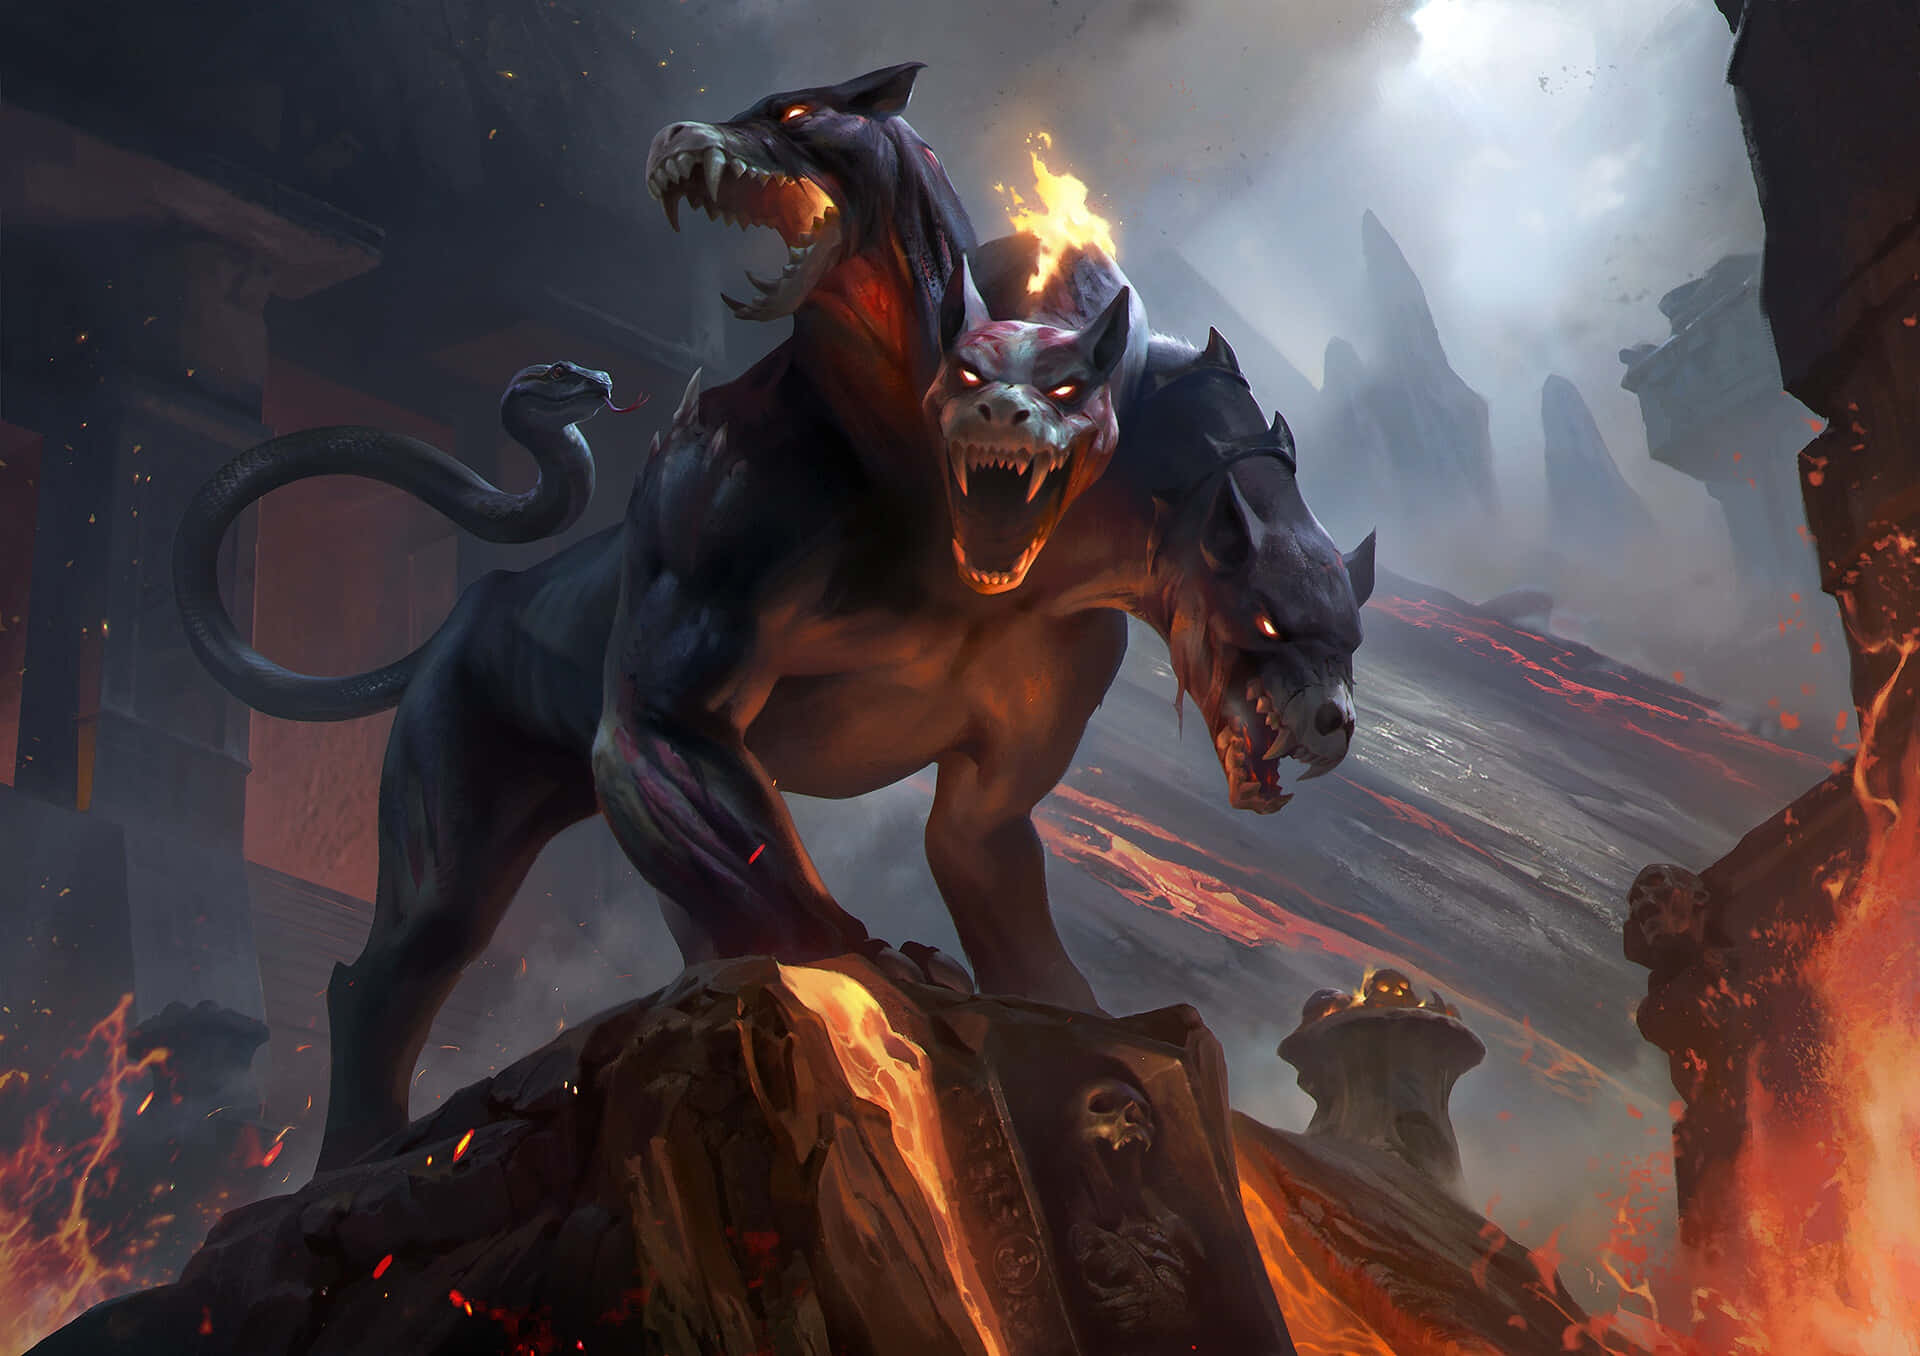 "The Mythical Guardian of Hades: Cerberus"